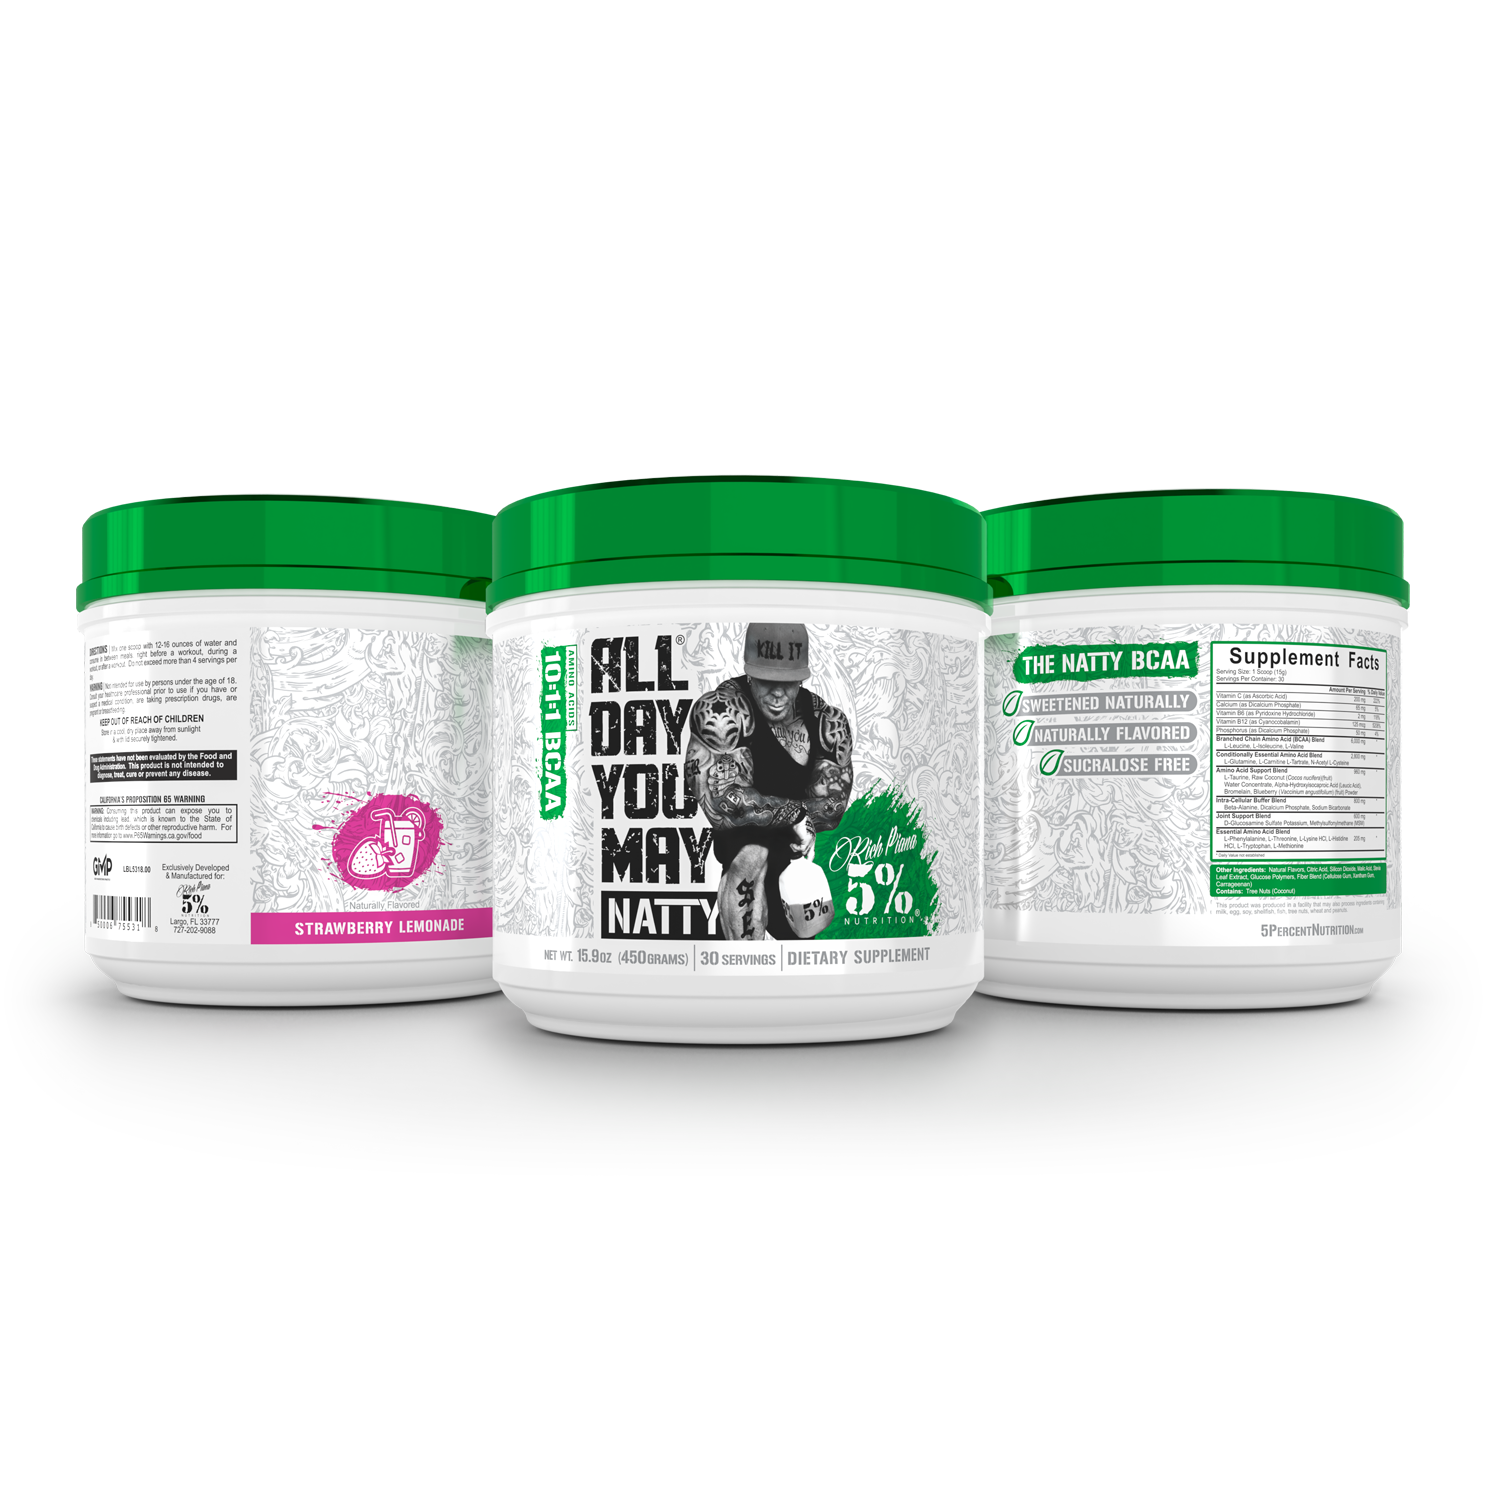 All Day You May Natty BCAA Recovery Drink - 5% Nutrition